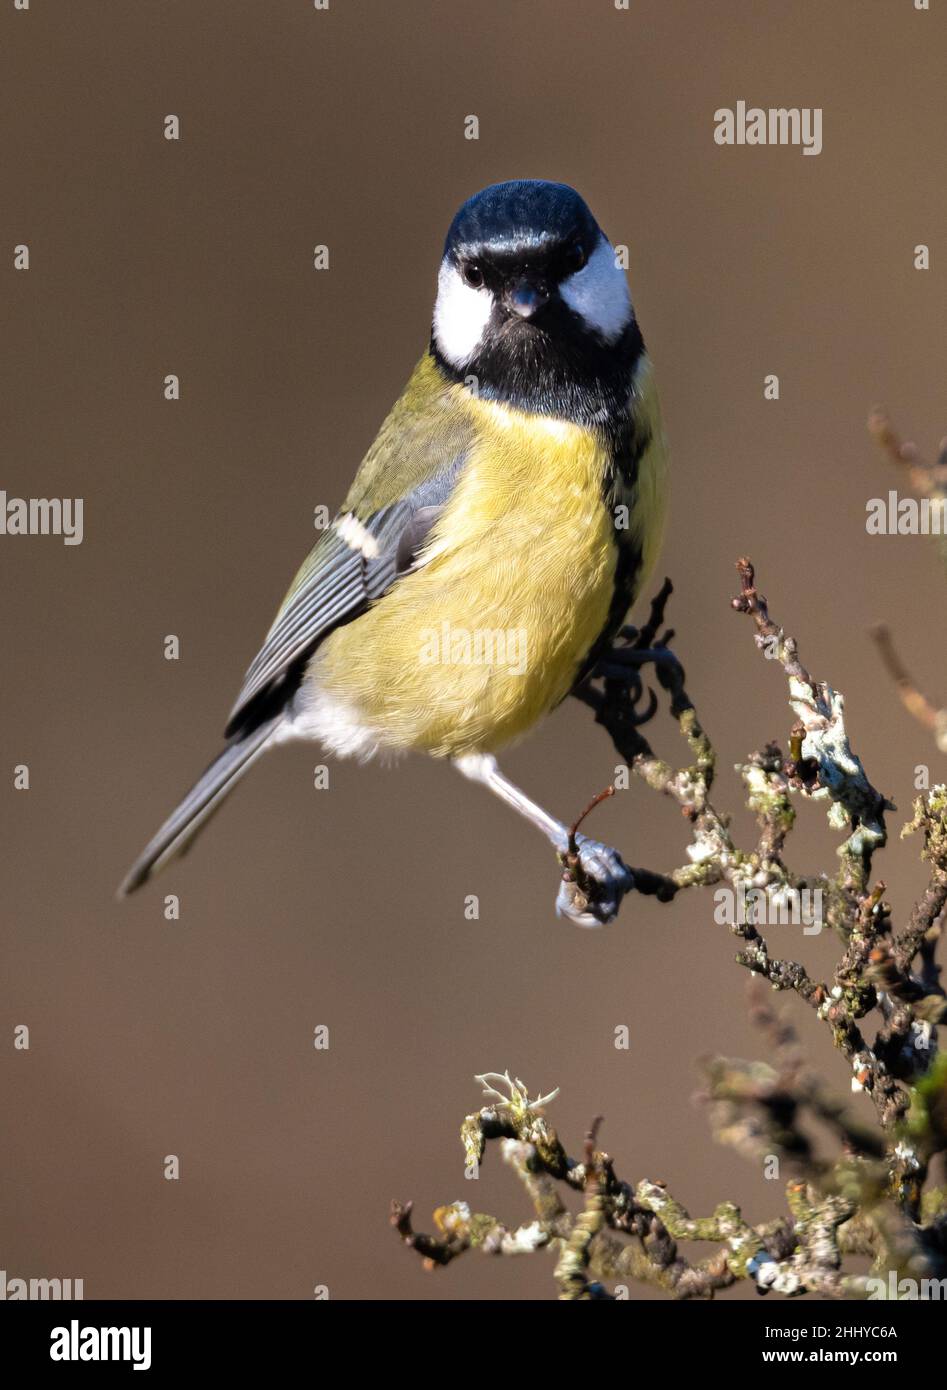 A great tit perched on a wooden twig on a plain background Stock Photo